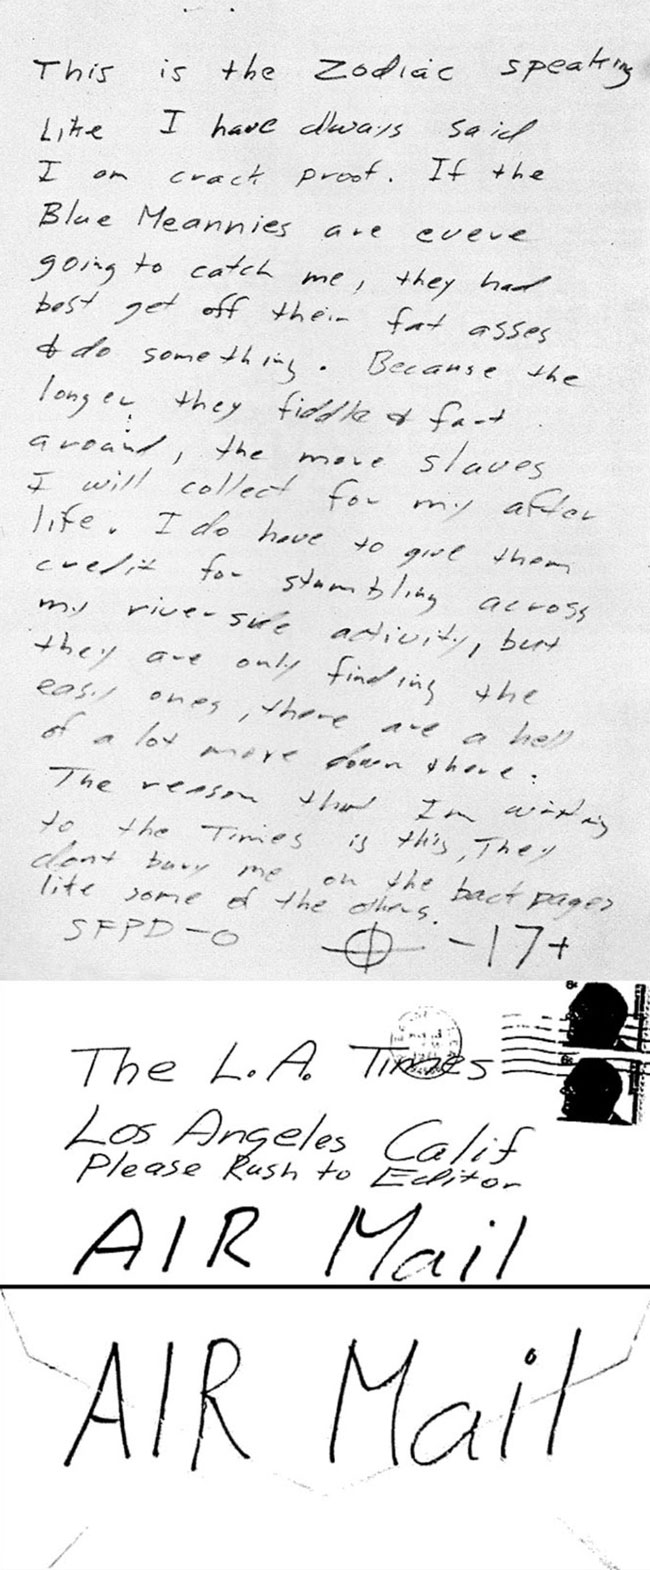 16-letter-to-la-times-postmarked-mar-13-71